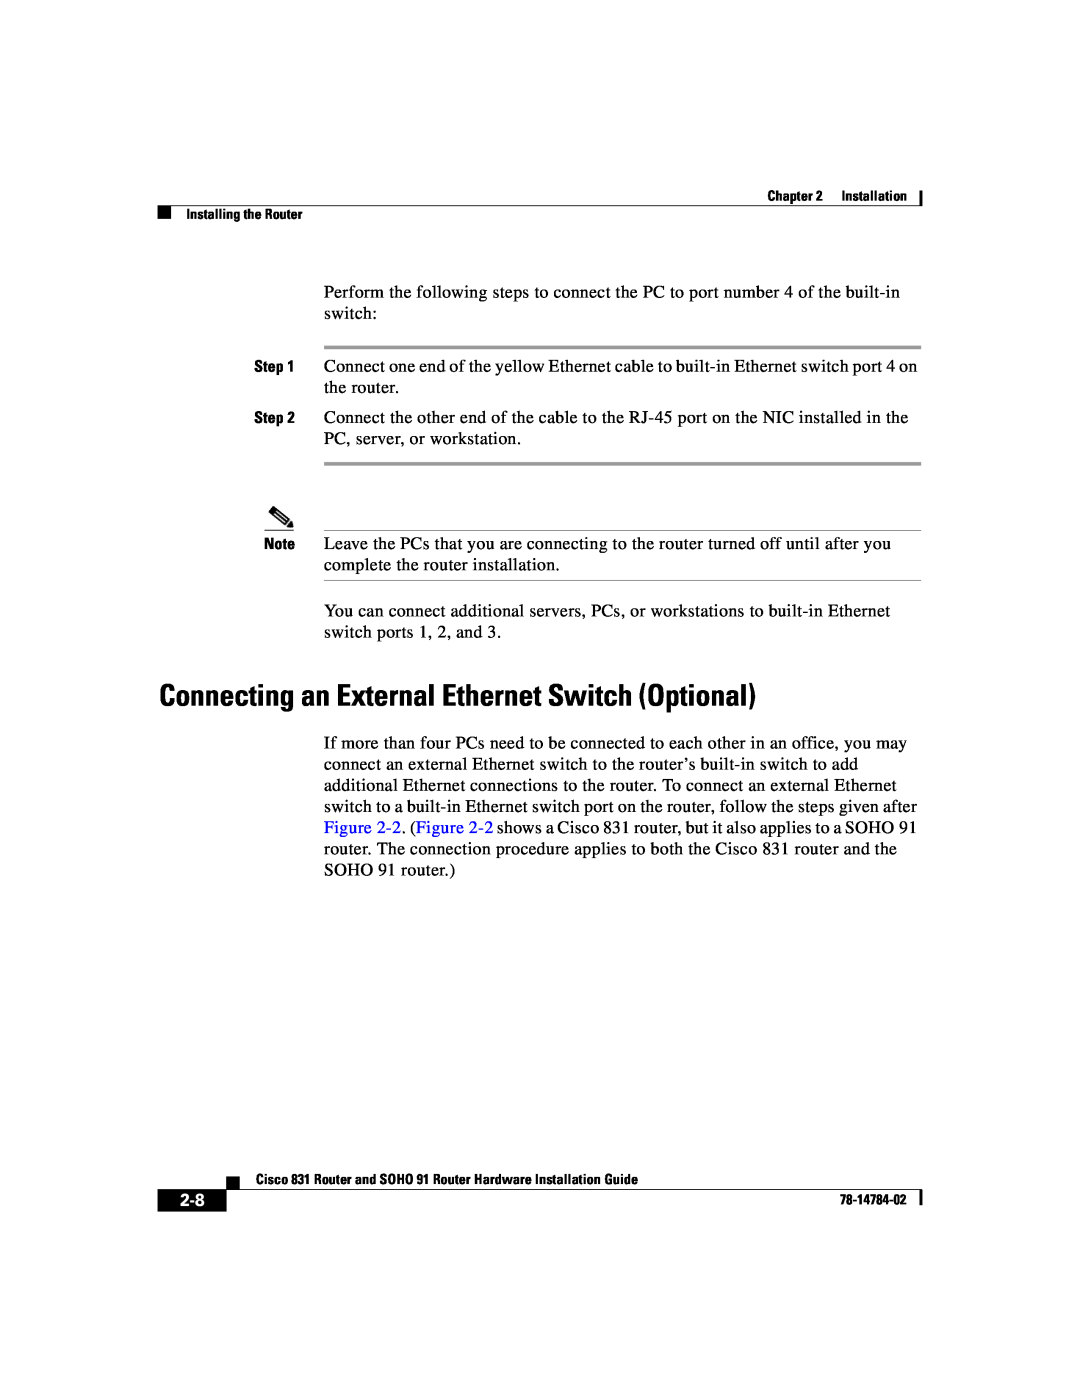 Cisco Systems 78-14784-02 manual Connecting an External Ethernet Switch Optional 